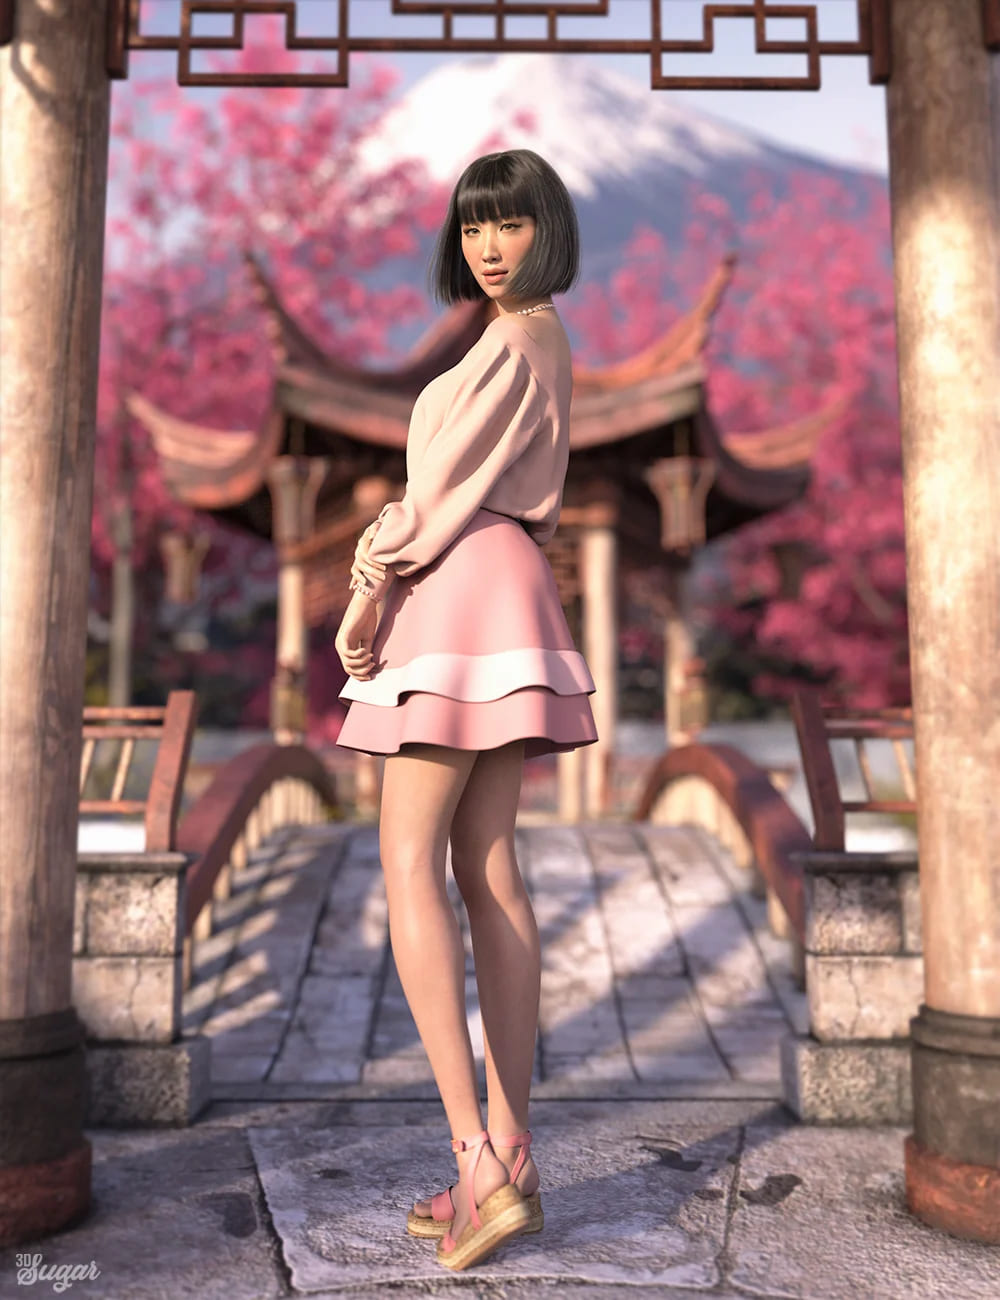 Slightly Shy Poses and Expressions for Genesis 8.1 Female_DAZ3D下载站